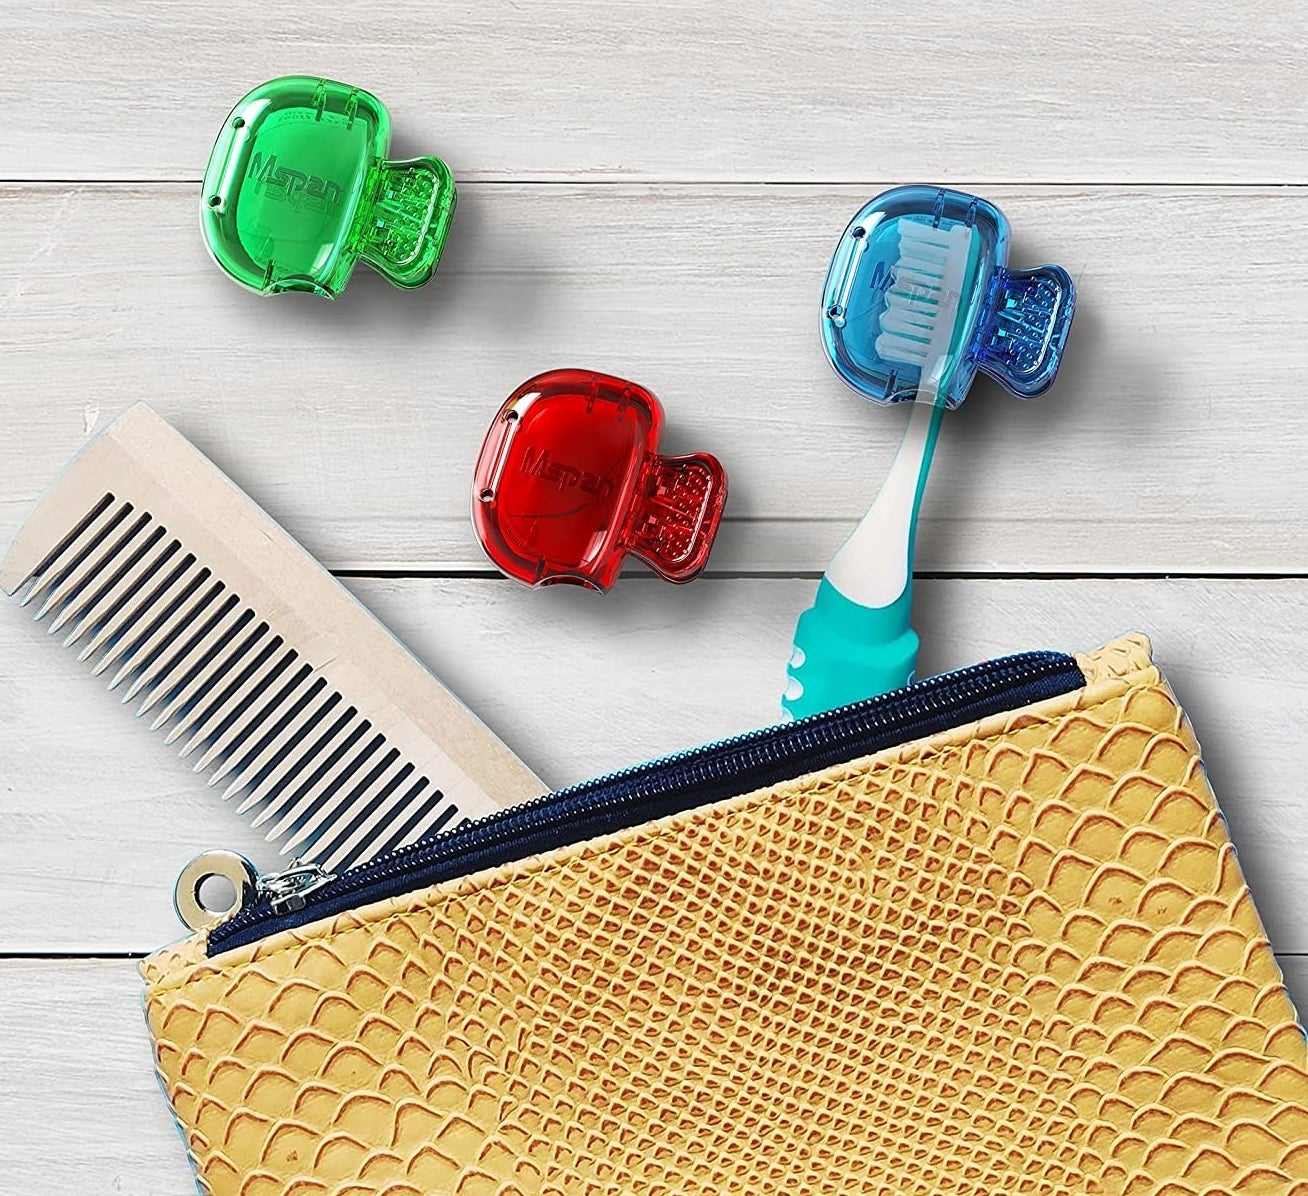 A toothbrush with one of the covers on it and two of the covers and a comb sticking out of a cosmetic bag